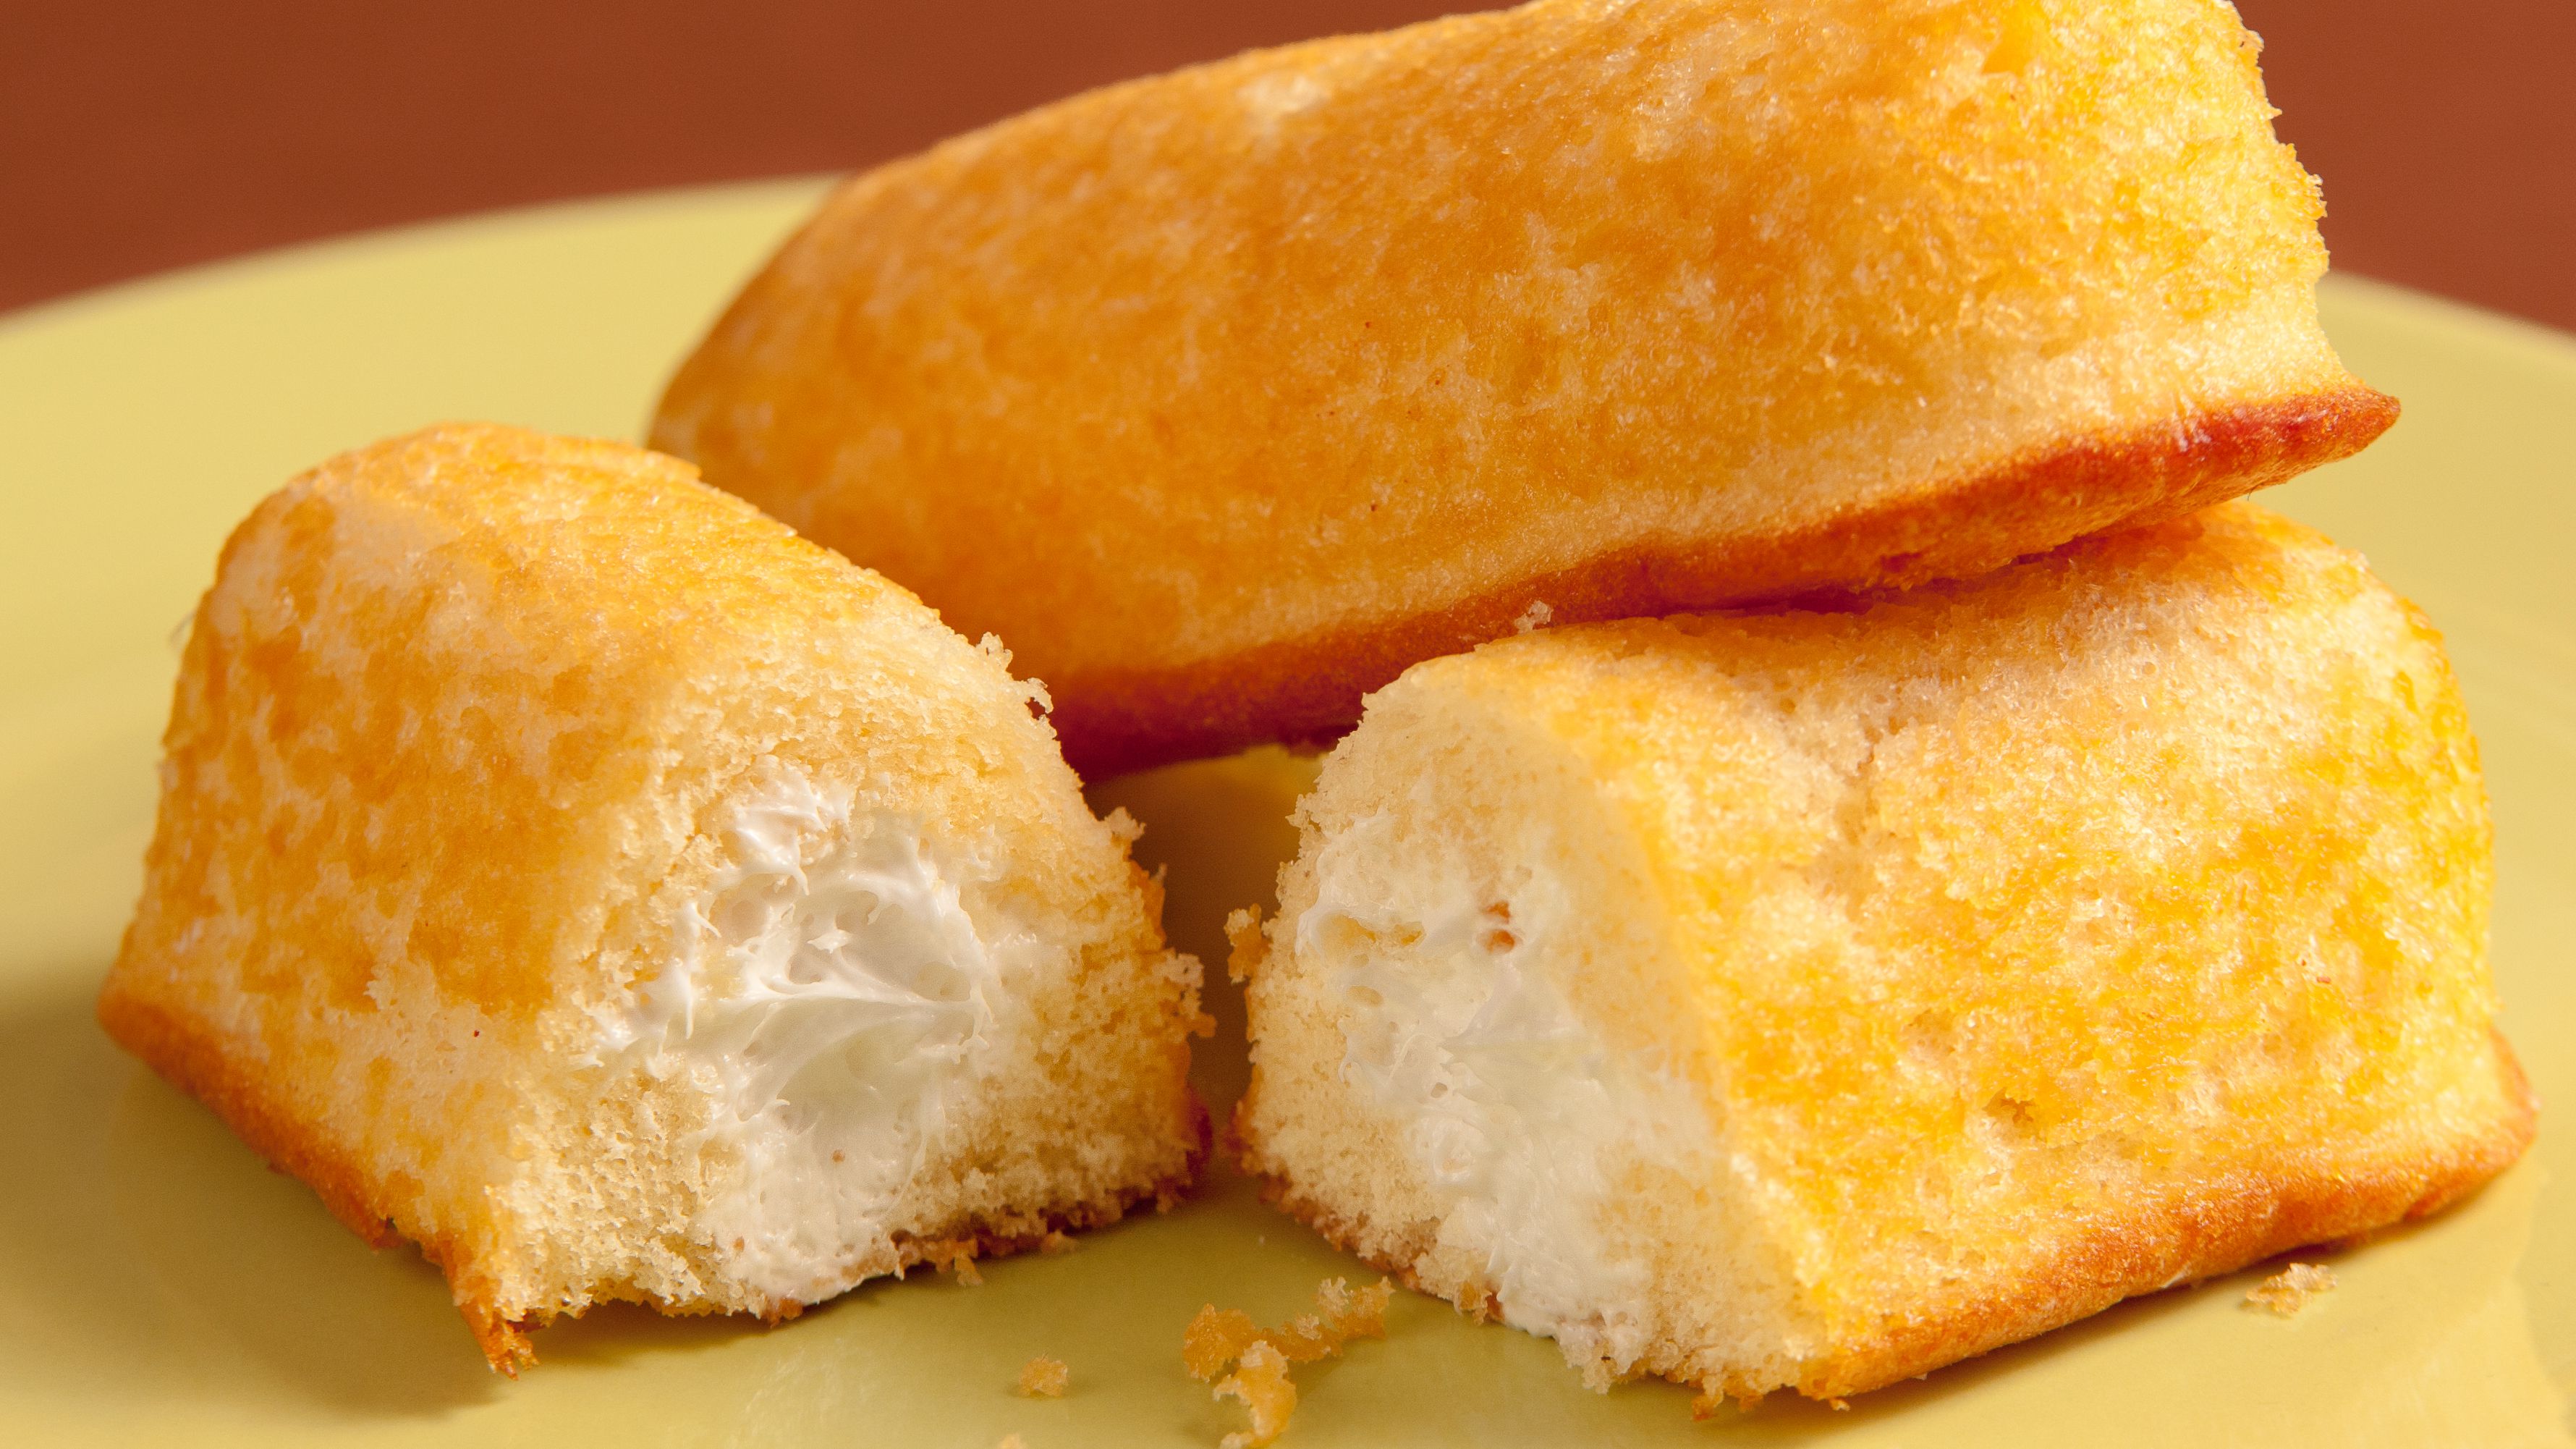 The Twinkie Myth It Stay Fresh Forever?